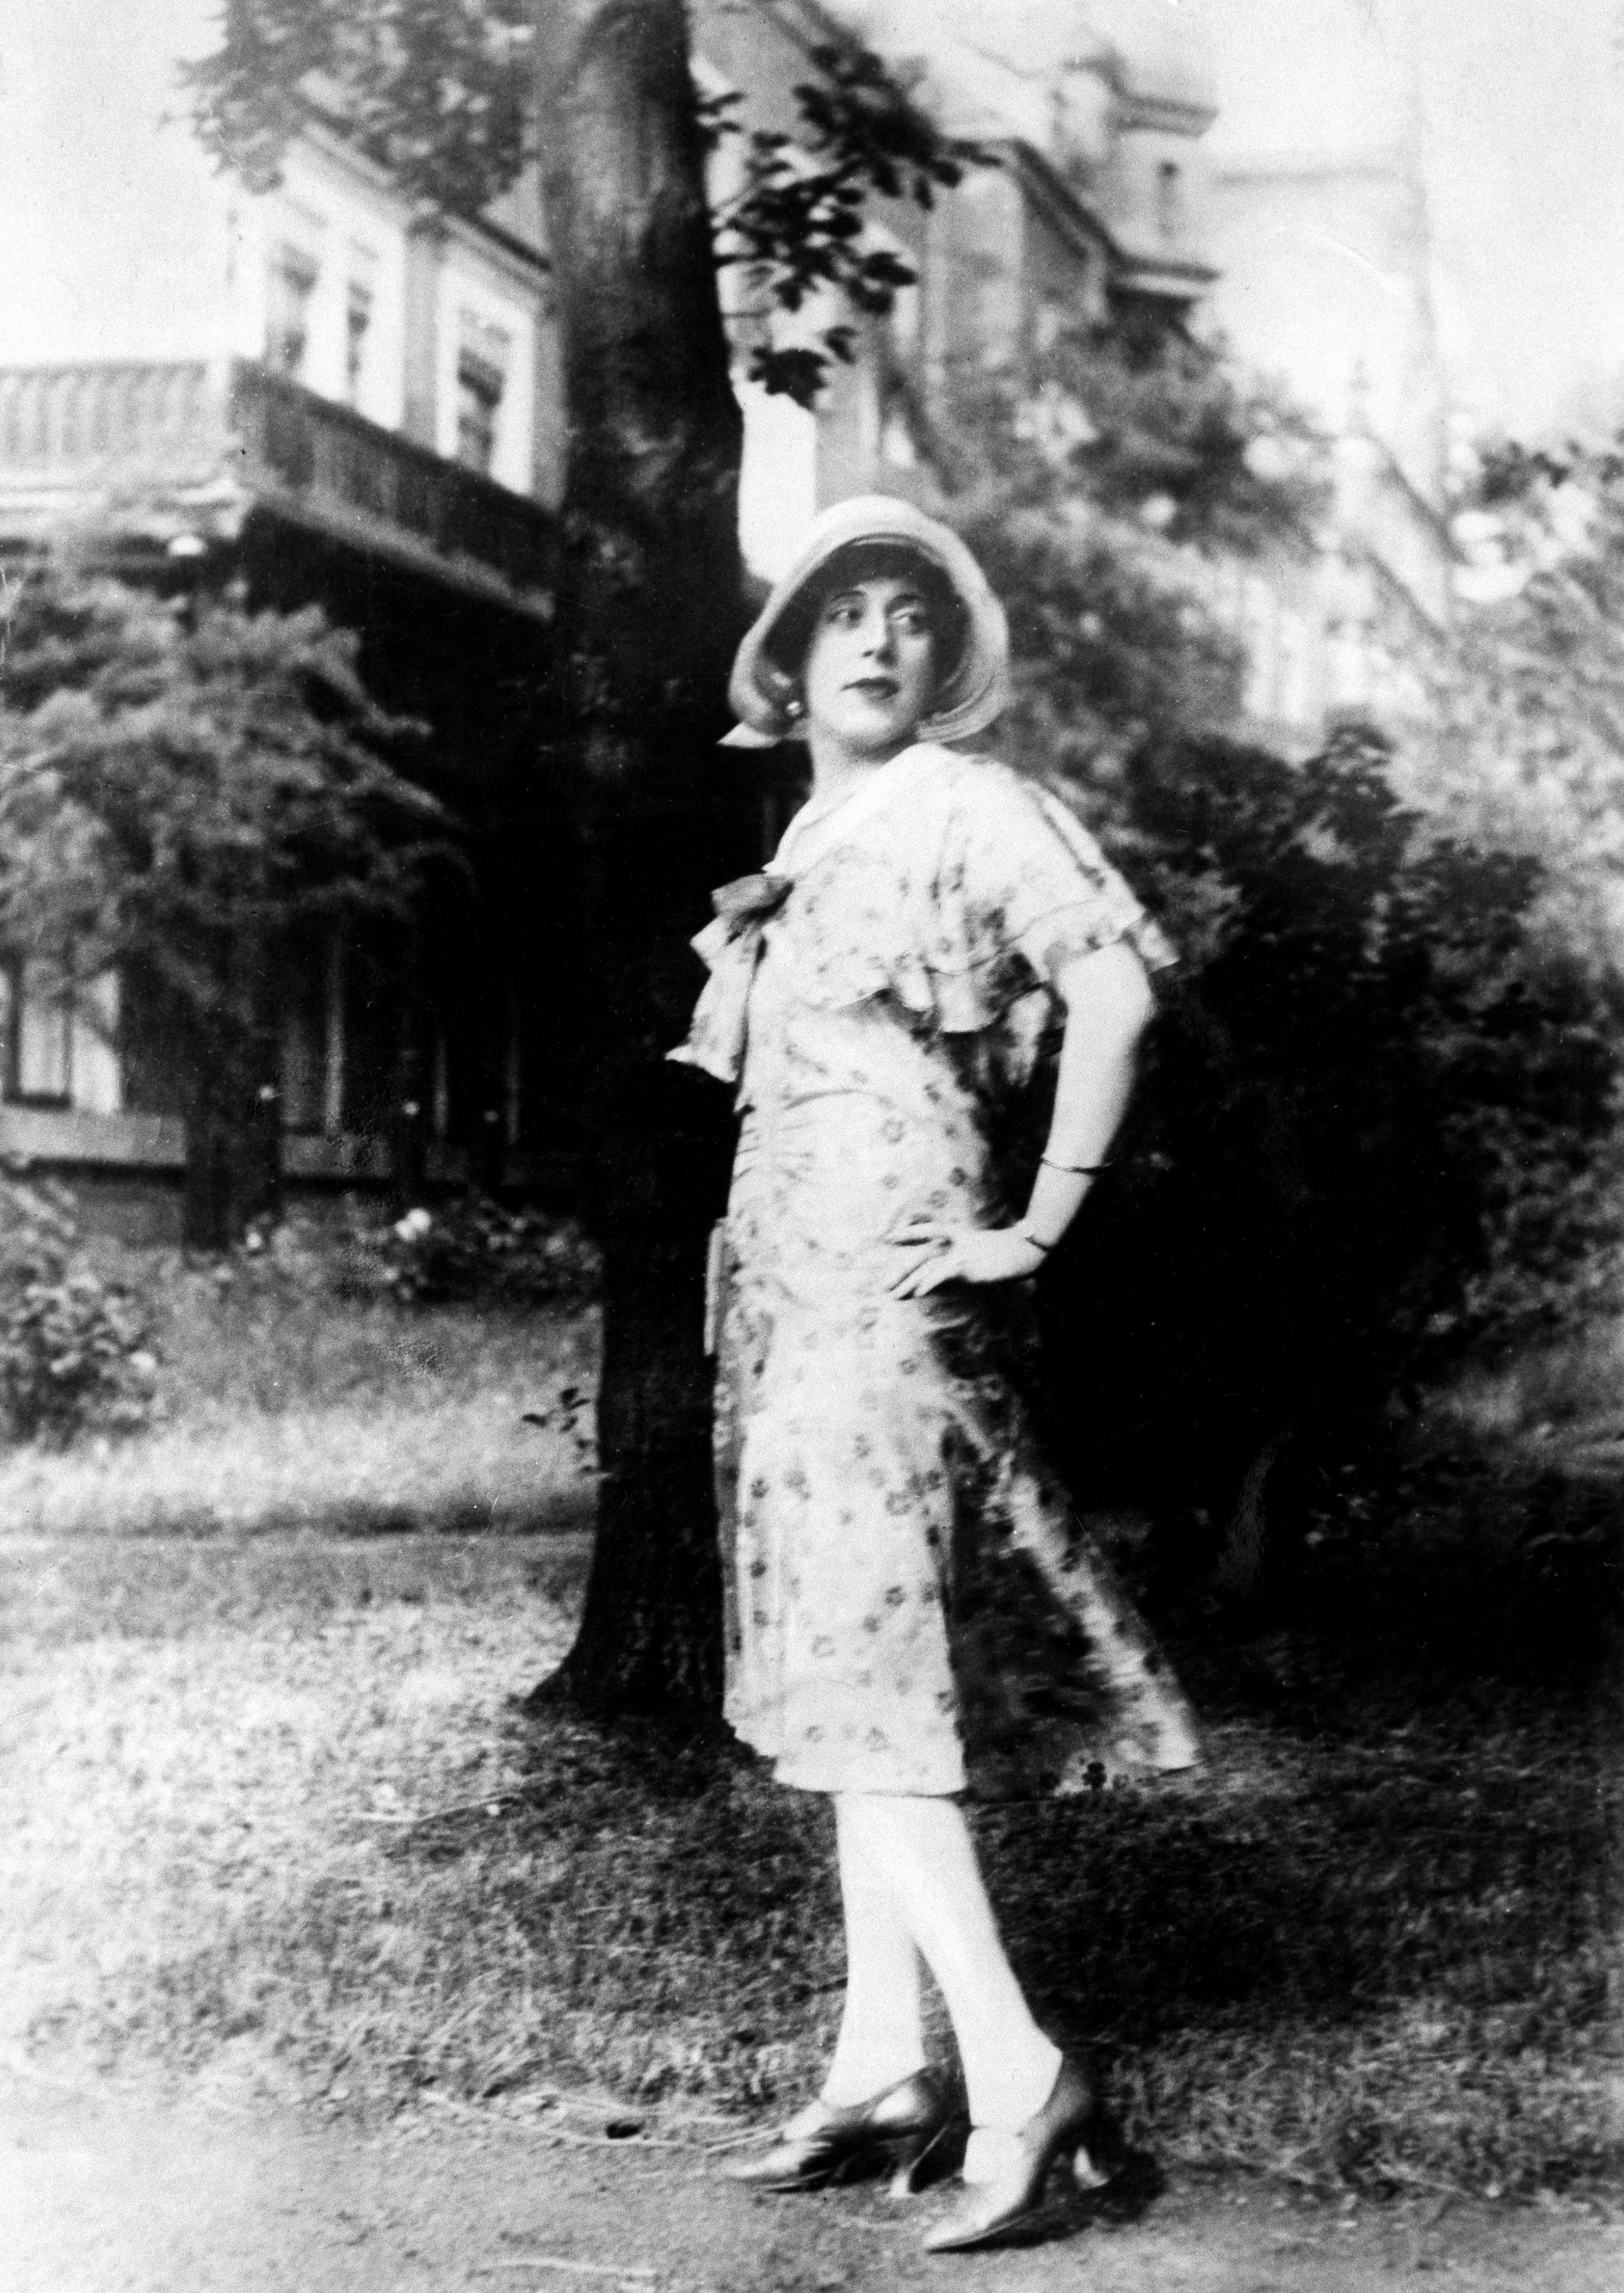 A black and white image of Lili Elbe